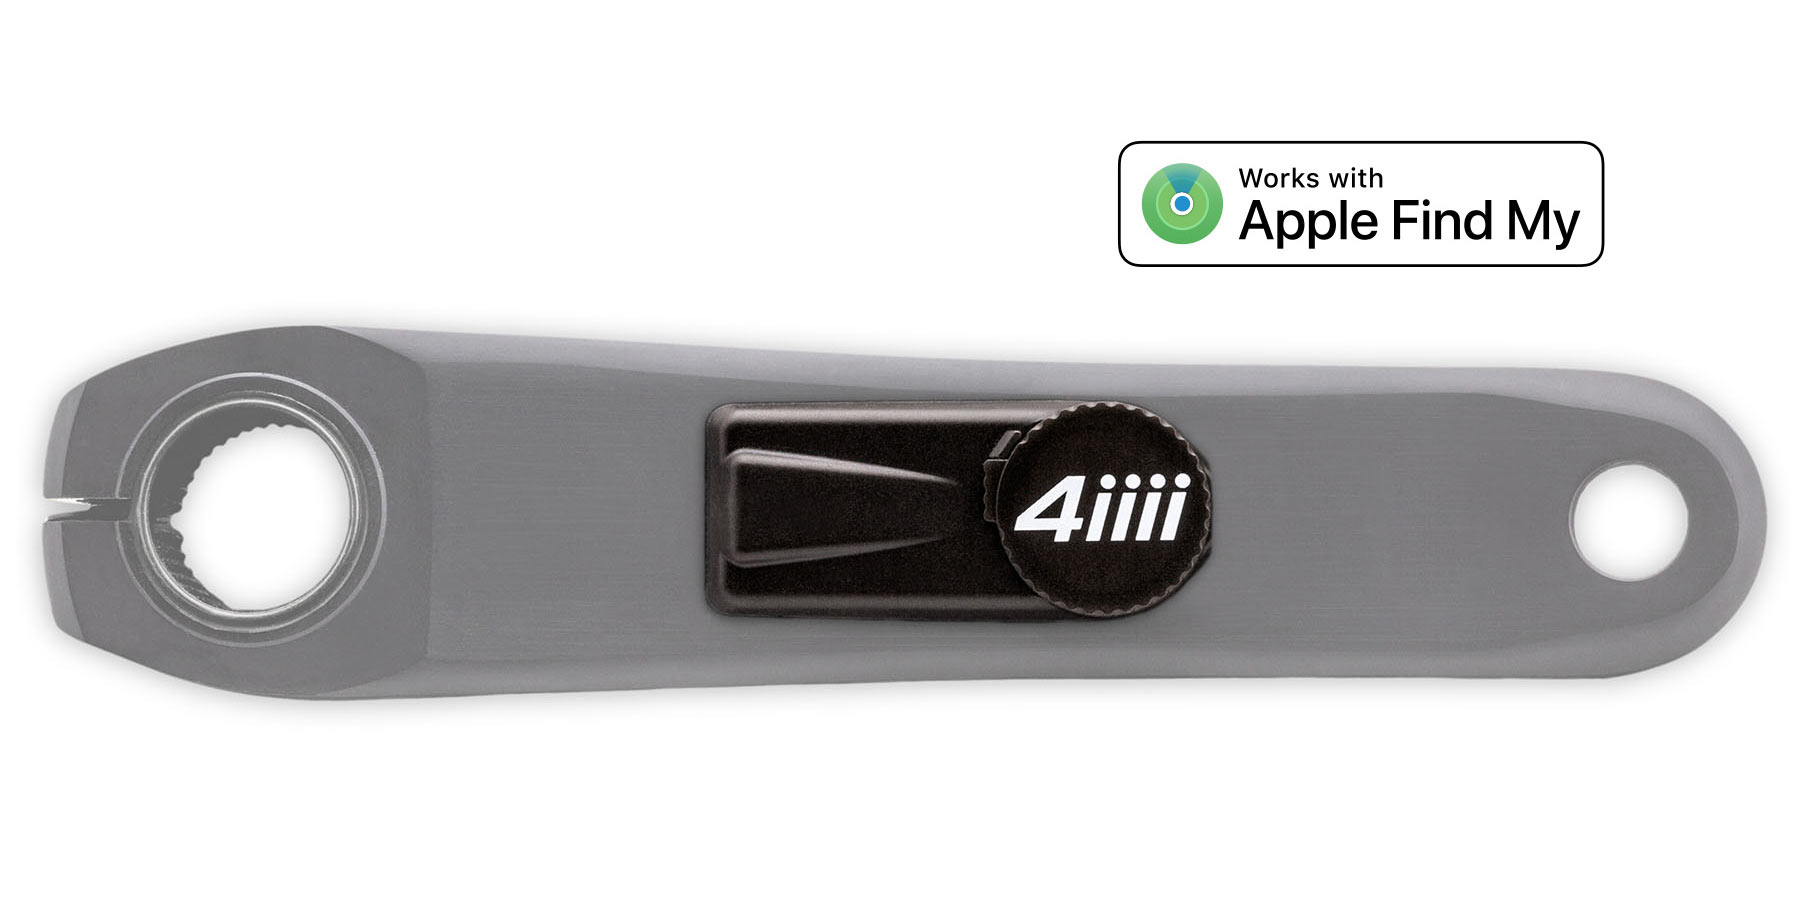 New-4iiii-Precision-3-Plus-power-meter-with-Apple-Find-My-app-tracking_factory-install.jpg